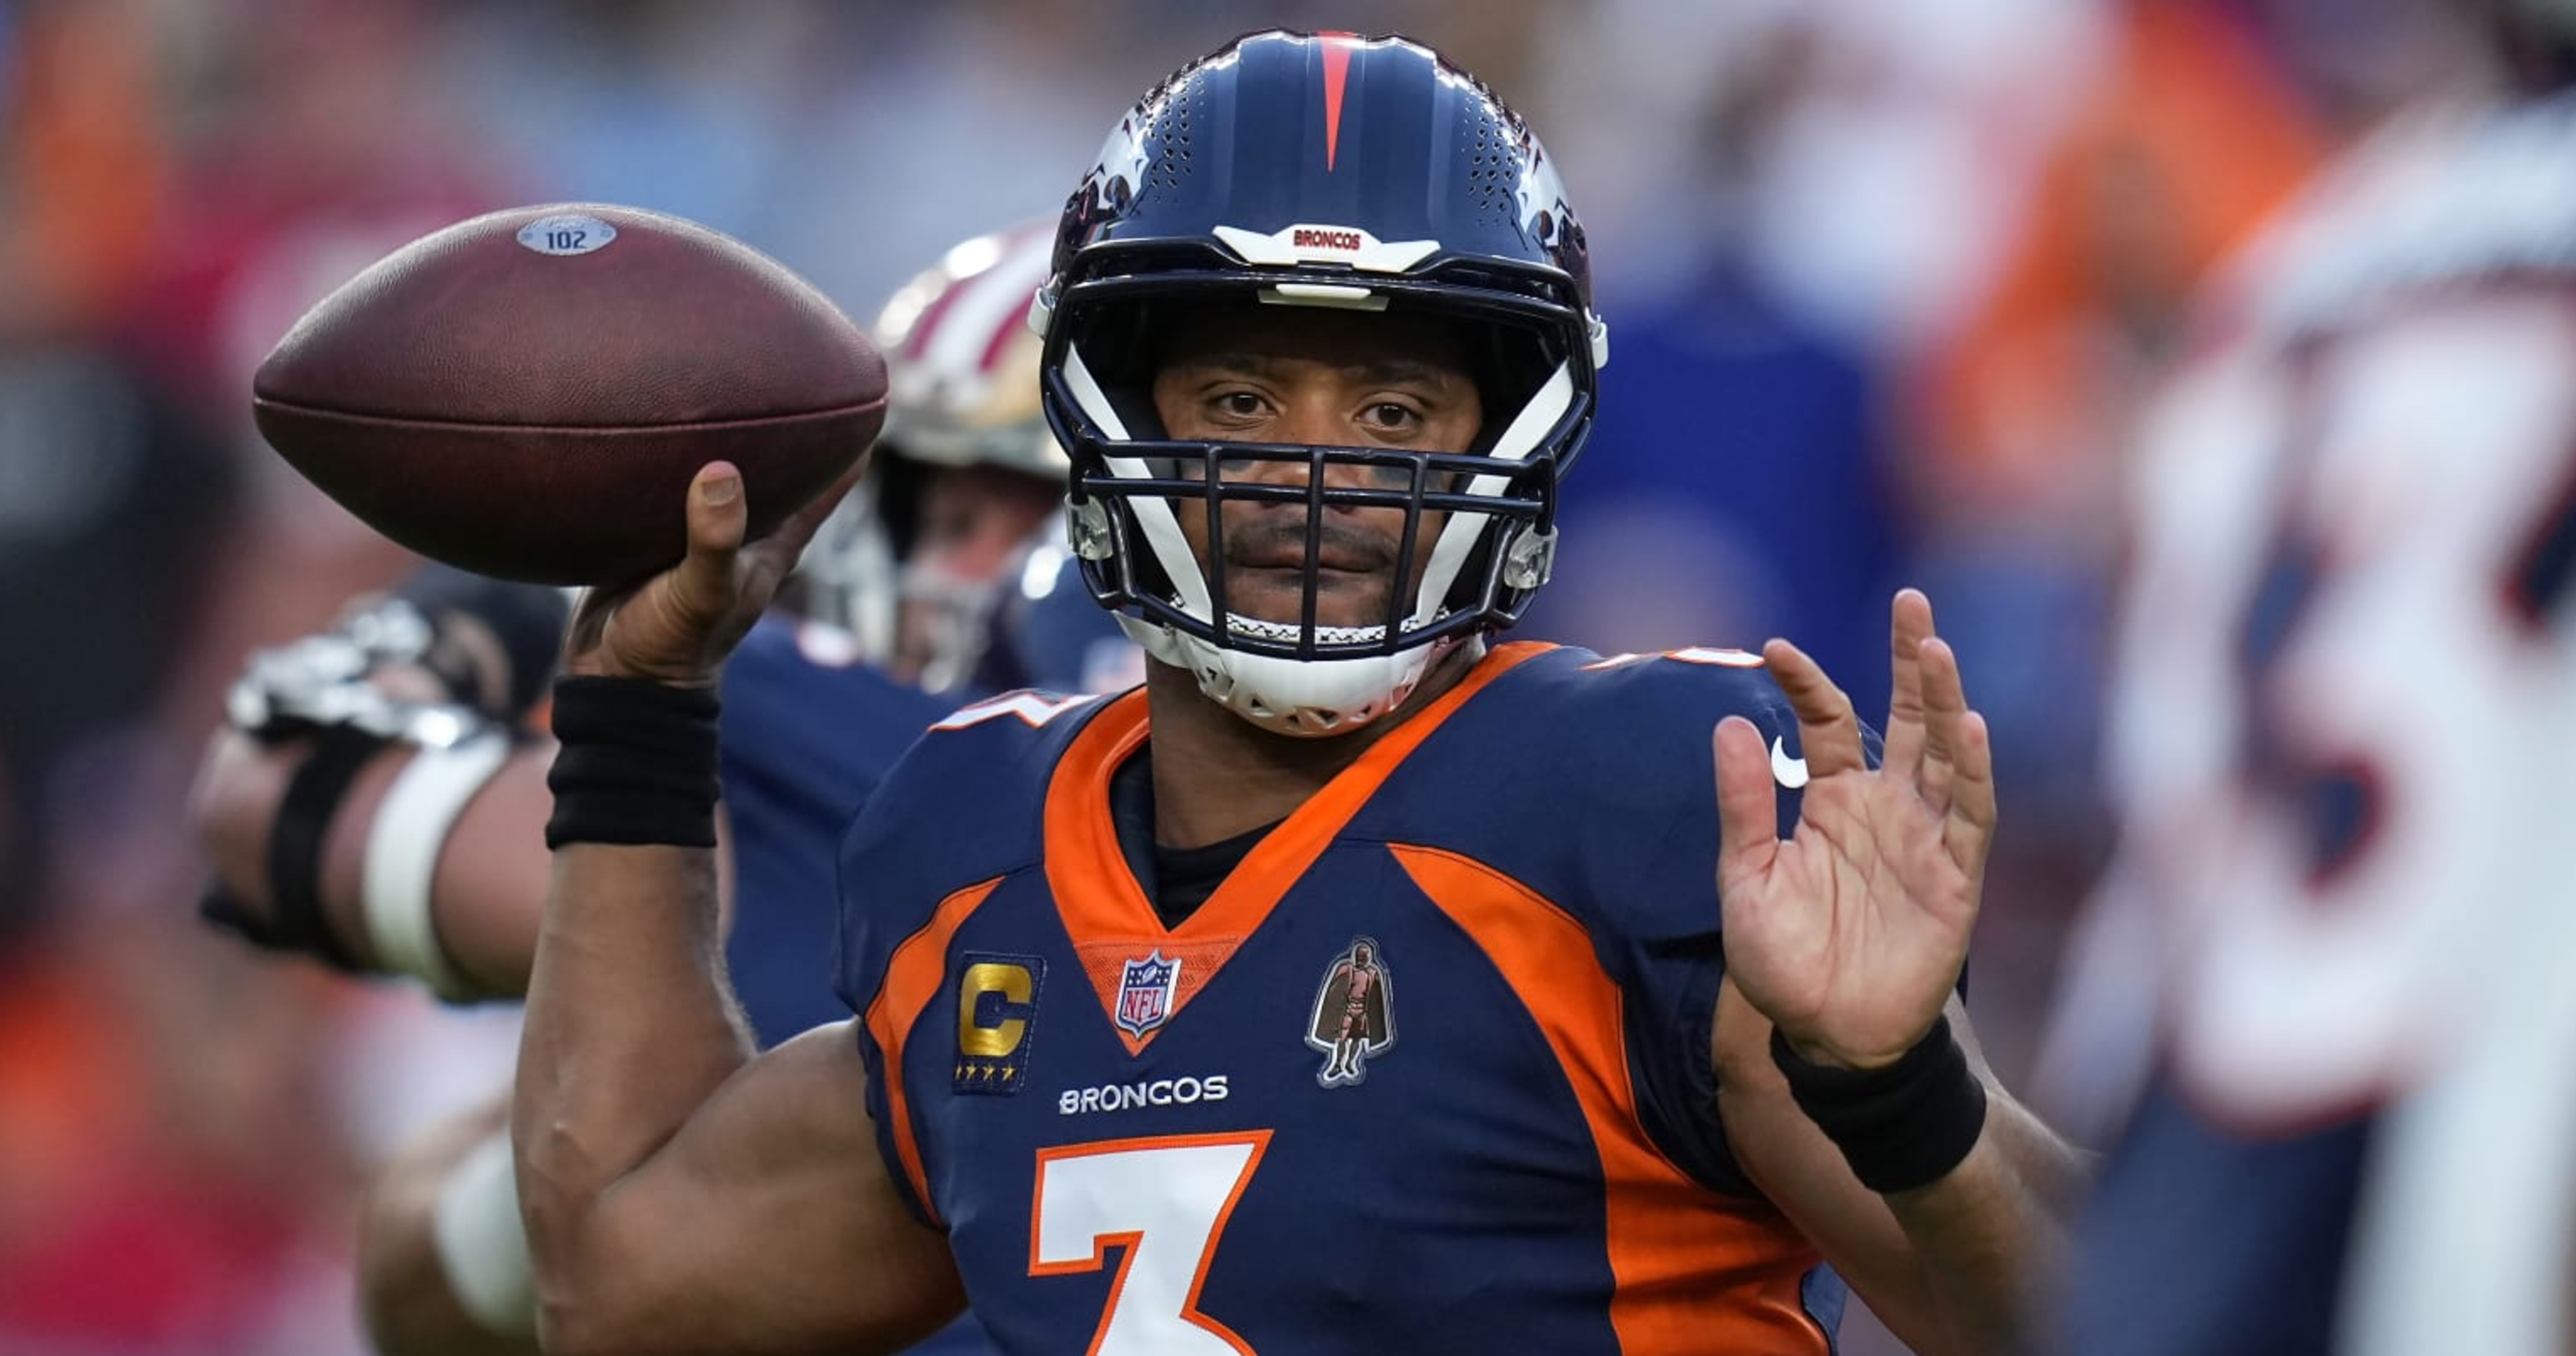 Russell Wilson Looks Bad but Broncos Remain Contenders in Shocking